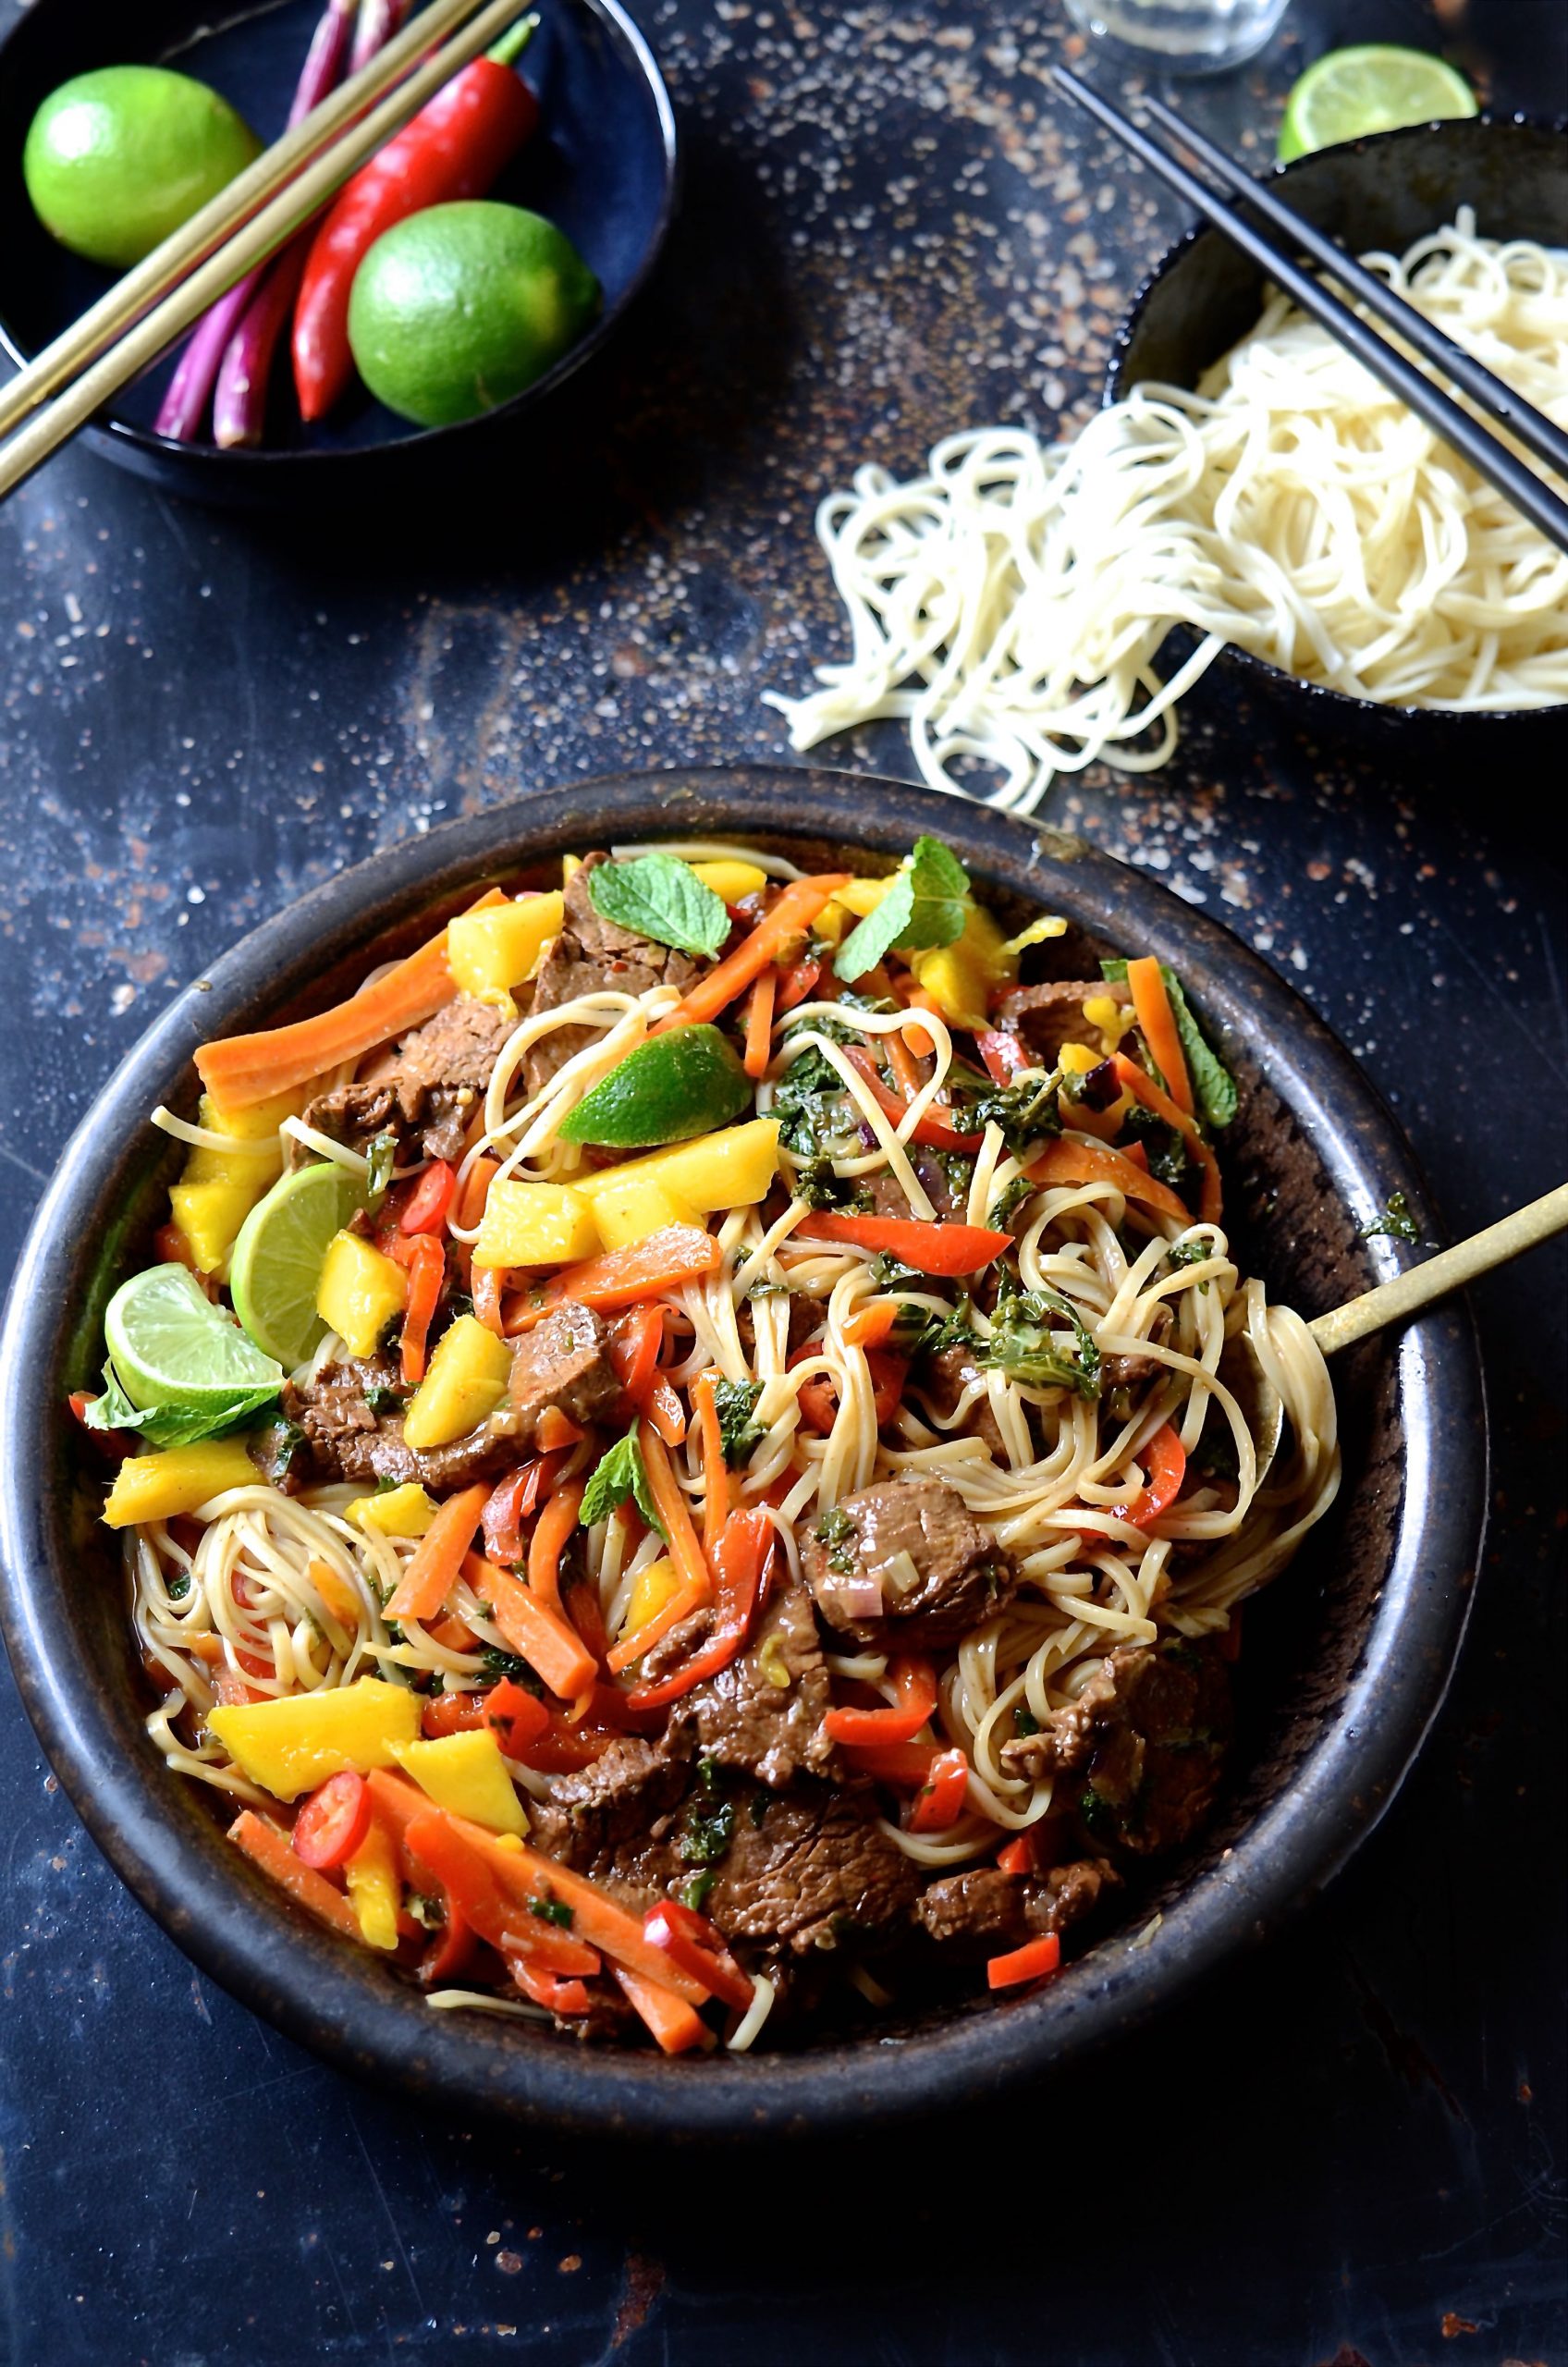 Spicy beef stir fry with sweet peppers and mango | Bibbyskitchen recipes